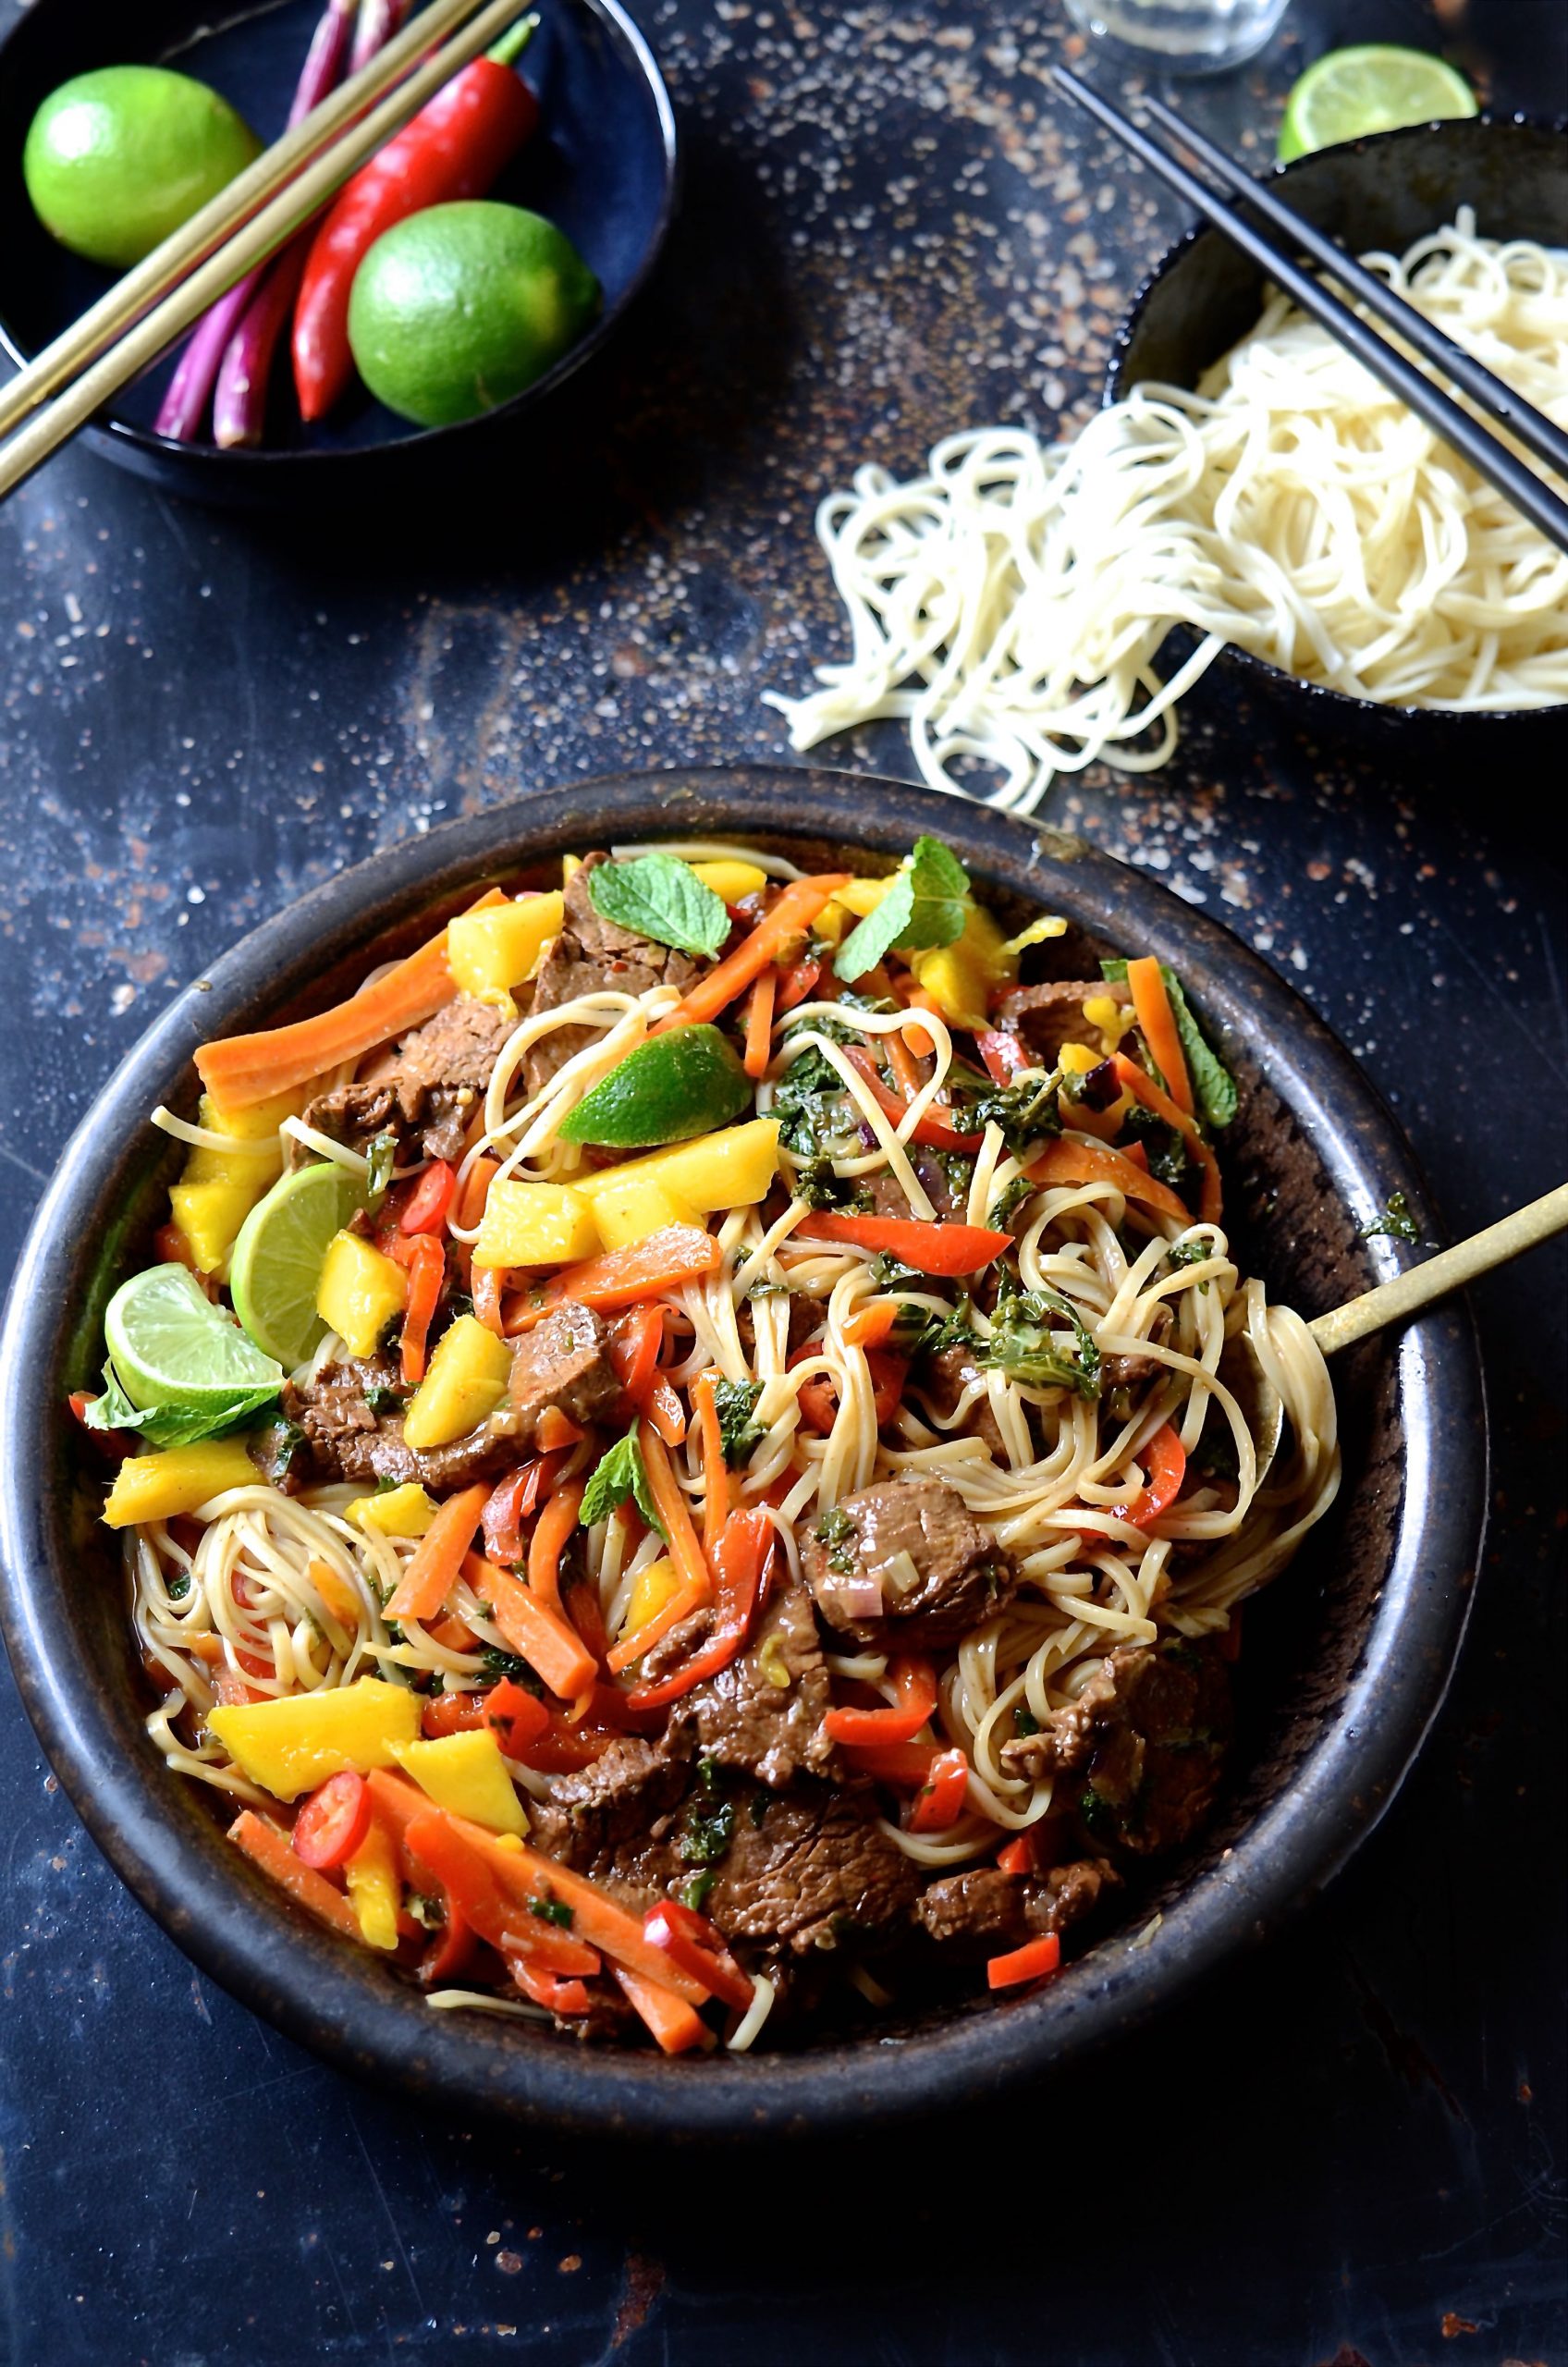 Spicy beef stir fry with sweet peppers and mango | Bibbyskitchen recipes